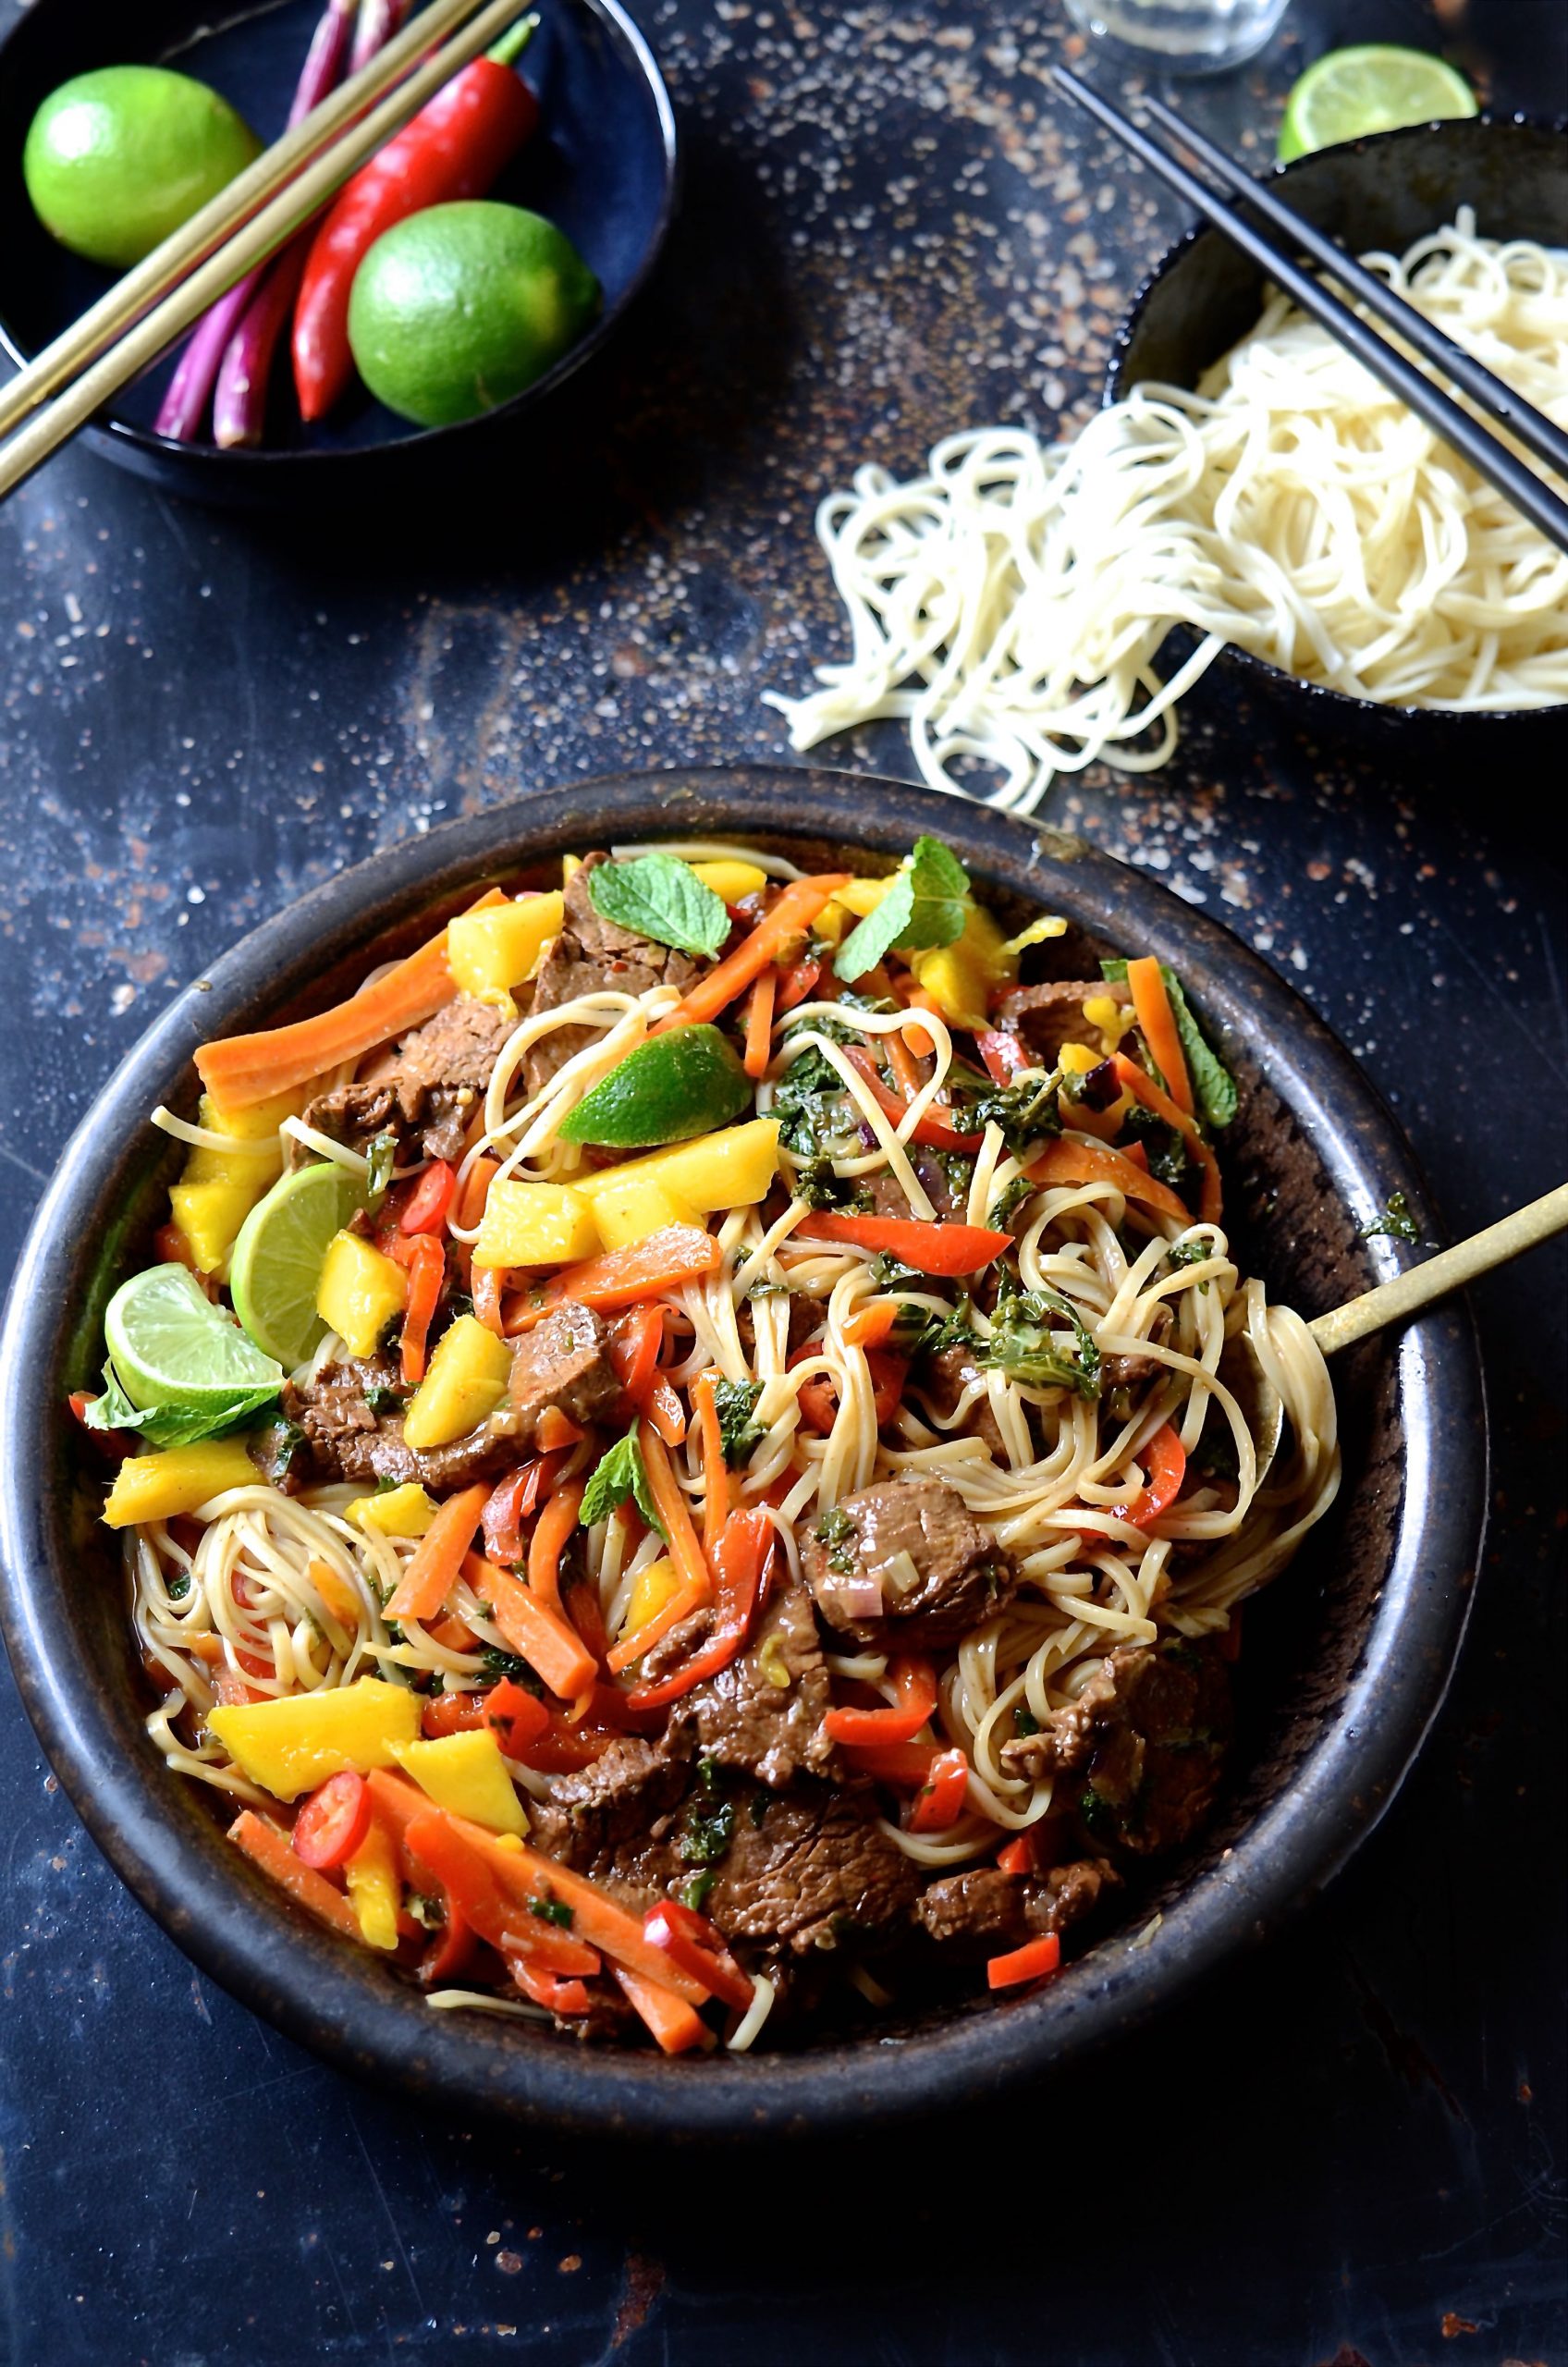 Spicy beef stir fry with sweet peppers and mango | Bibbyskitchen recipes